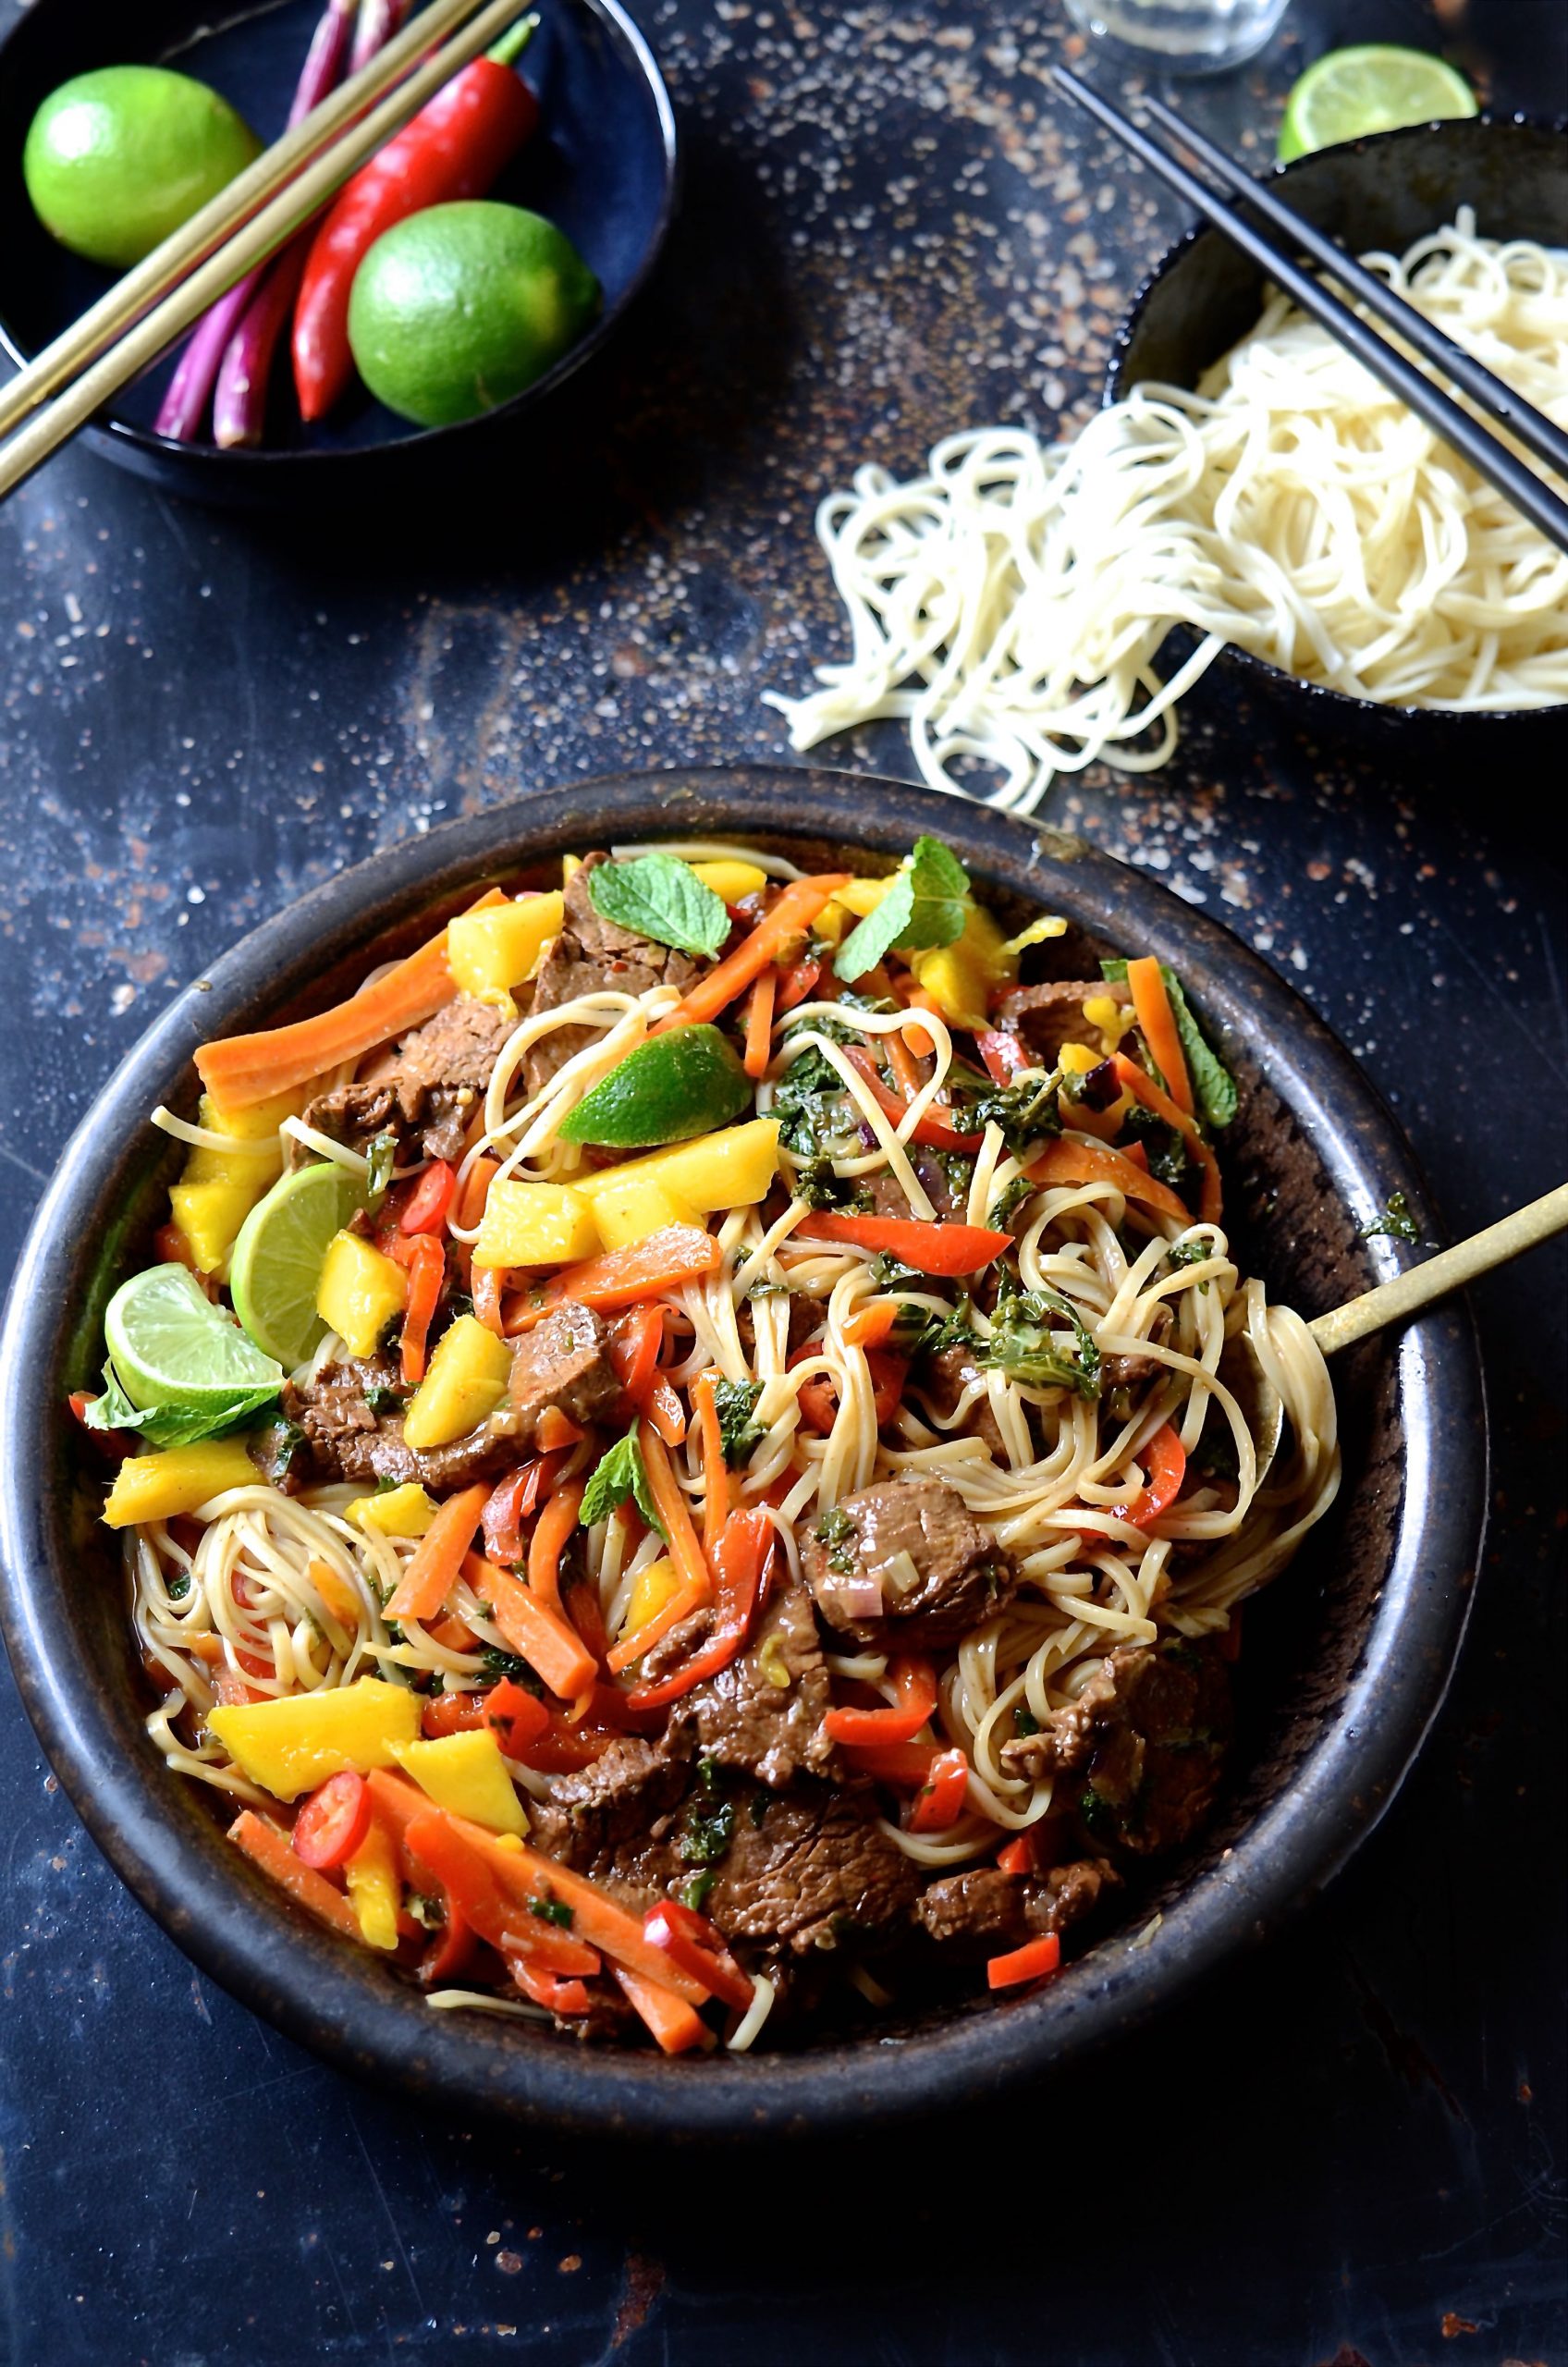 Spicy beef stir fry with sweet peppers and mango | Bibbyskitchen recipes